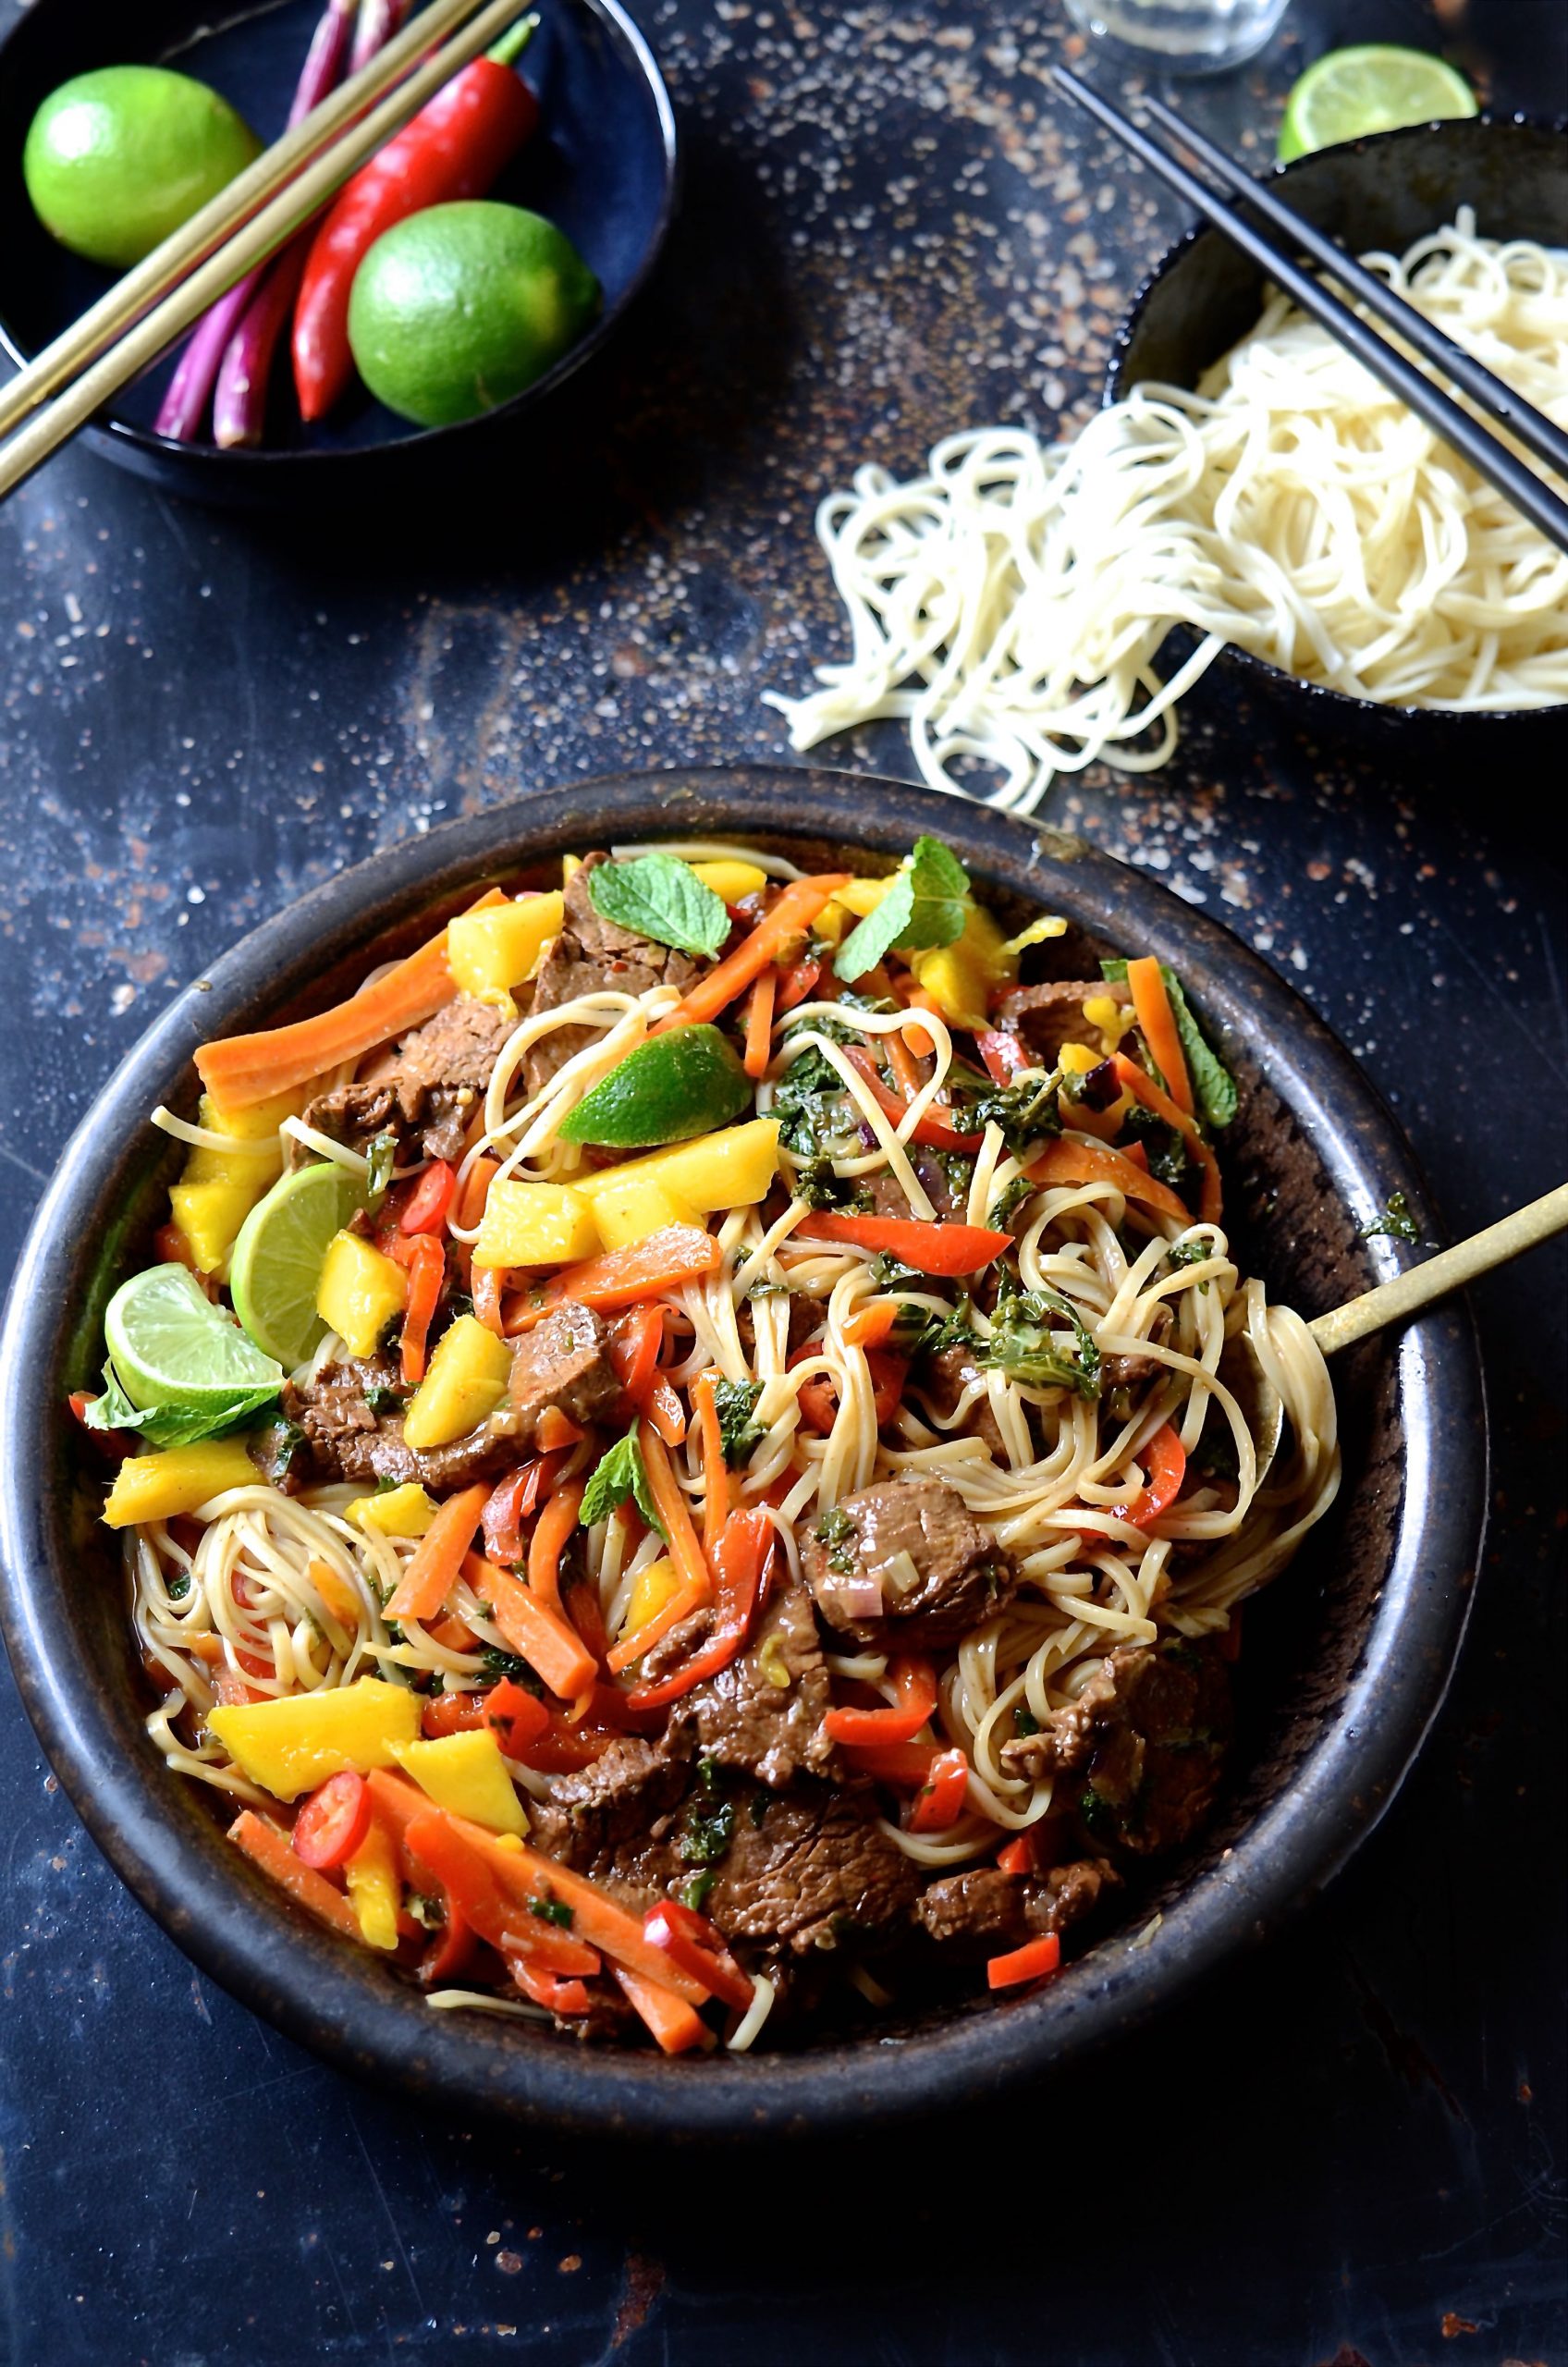 Spicy beef stir fry with sweet peppers and mango | Bibbyskitchen recipes